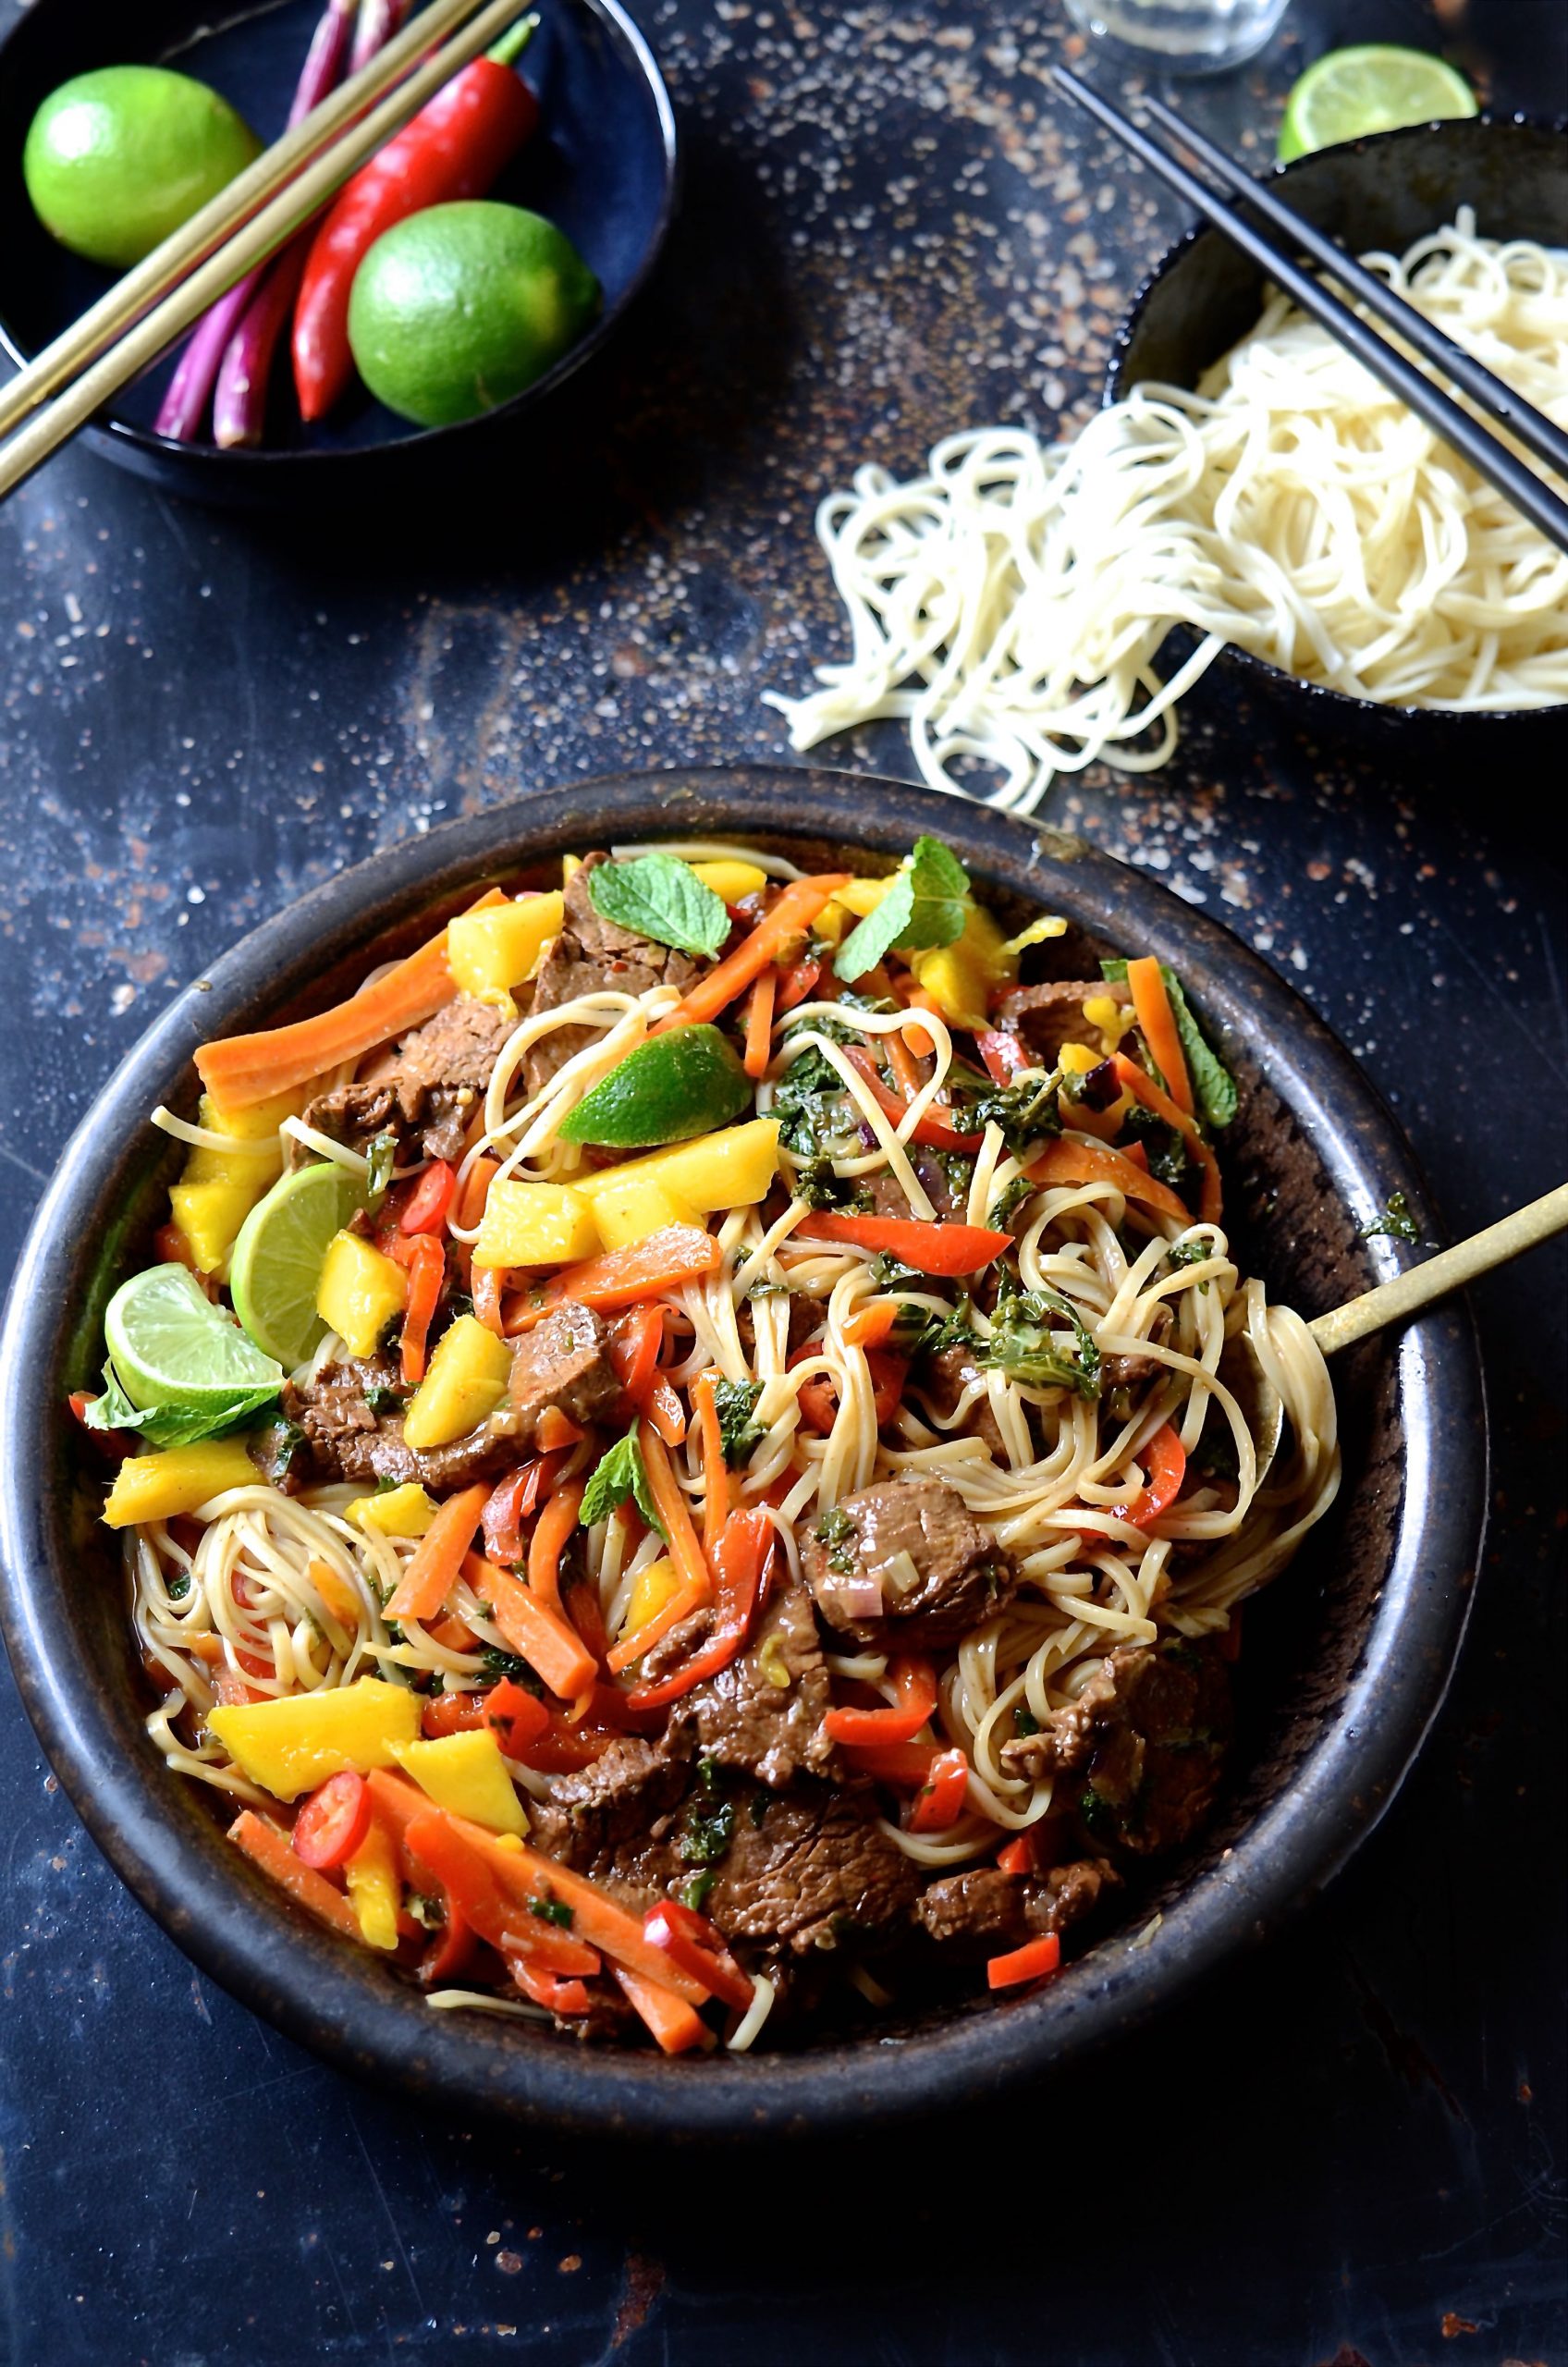 Spicy beef stir fry with sweet peppers and mango | Bibbyskitchen recipes